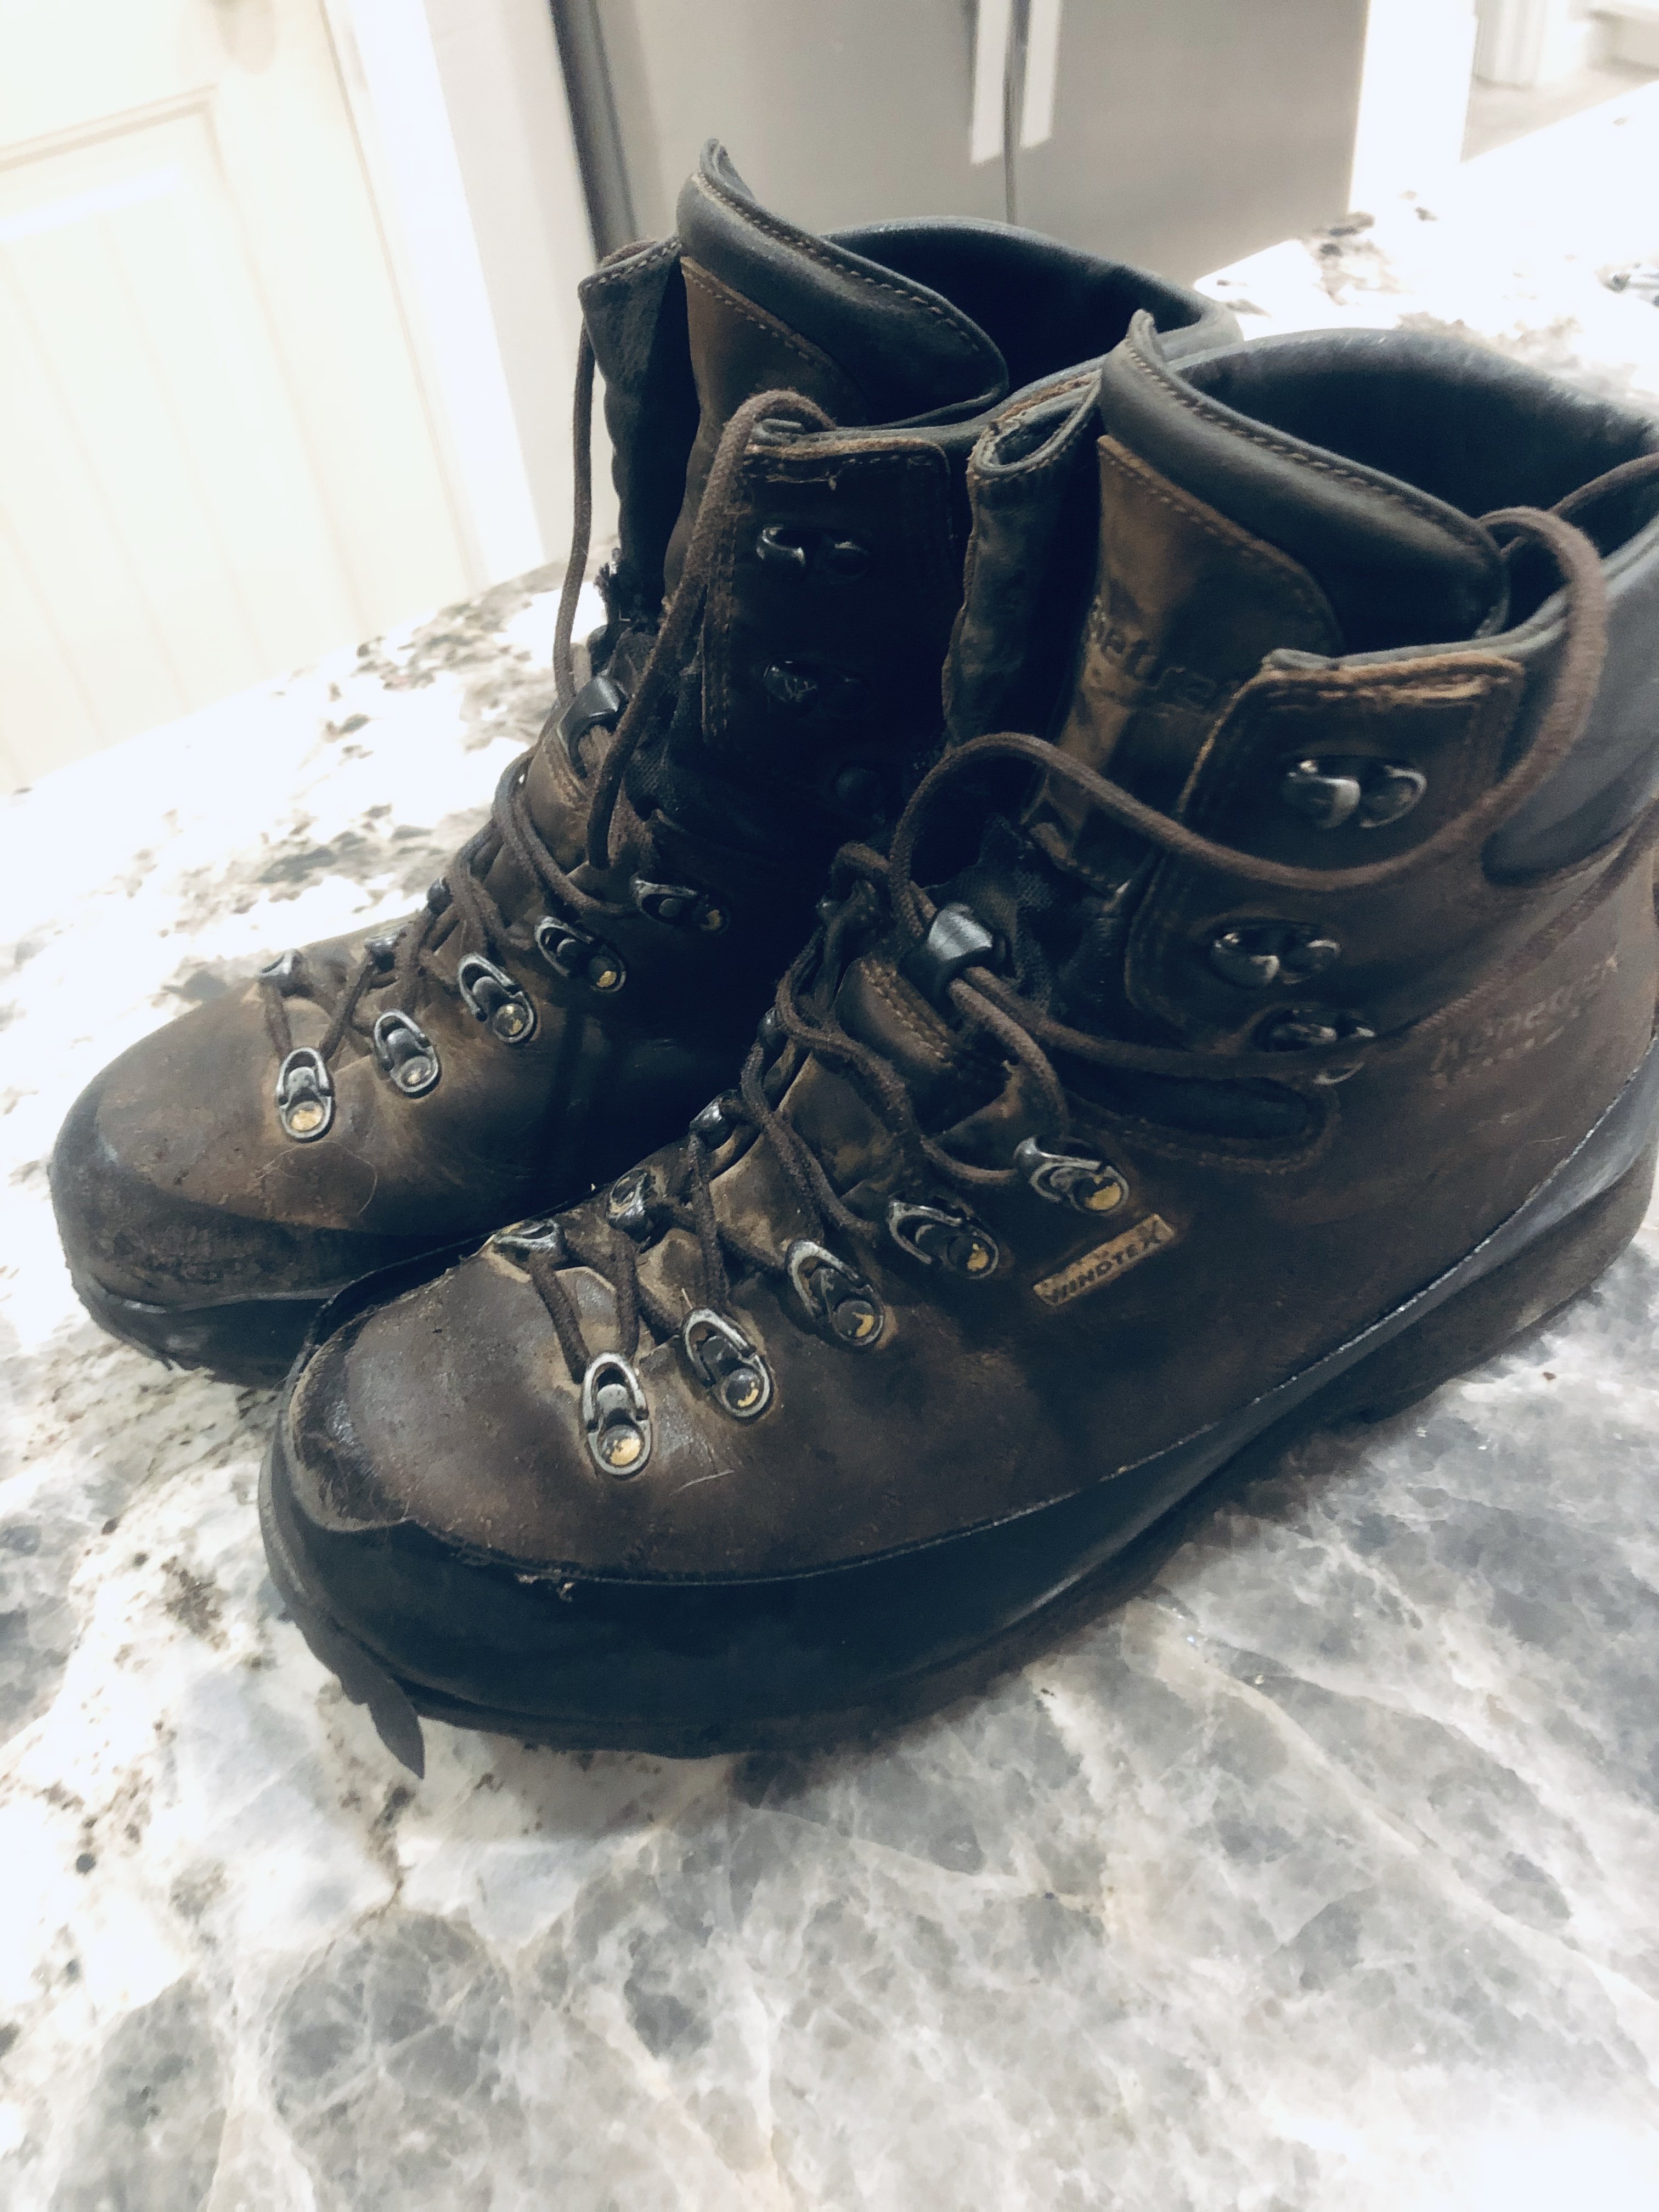 Kenetrek Boots - Classified Ads - CouesWhitetail.com Discussion forum